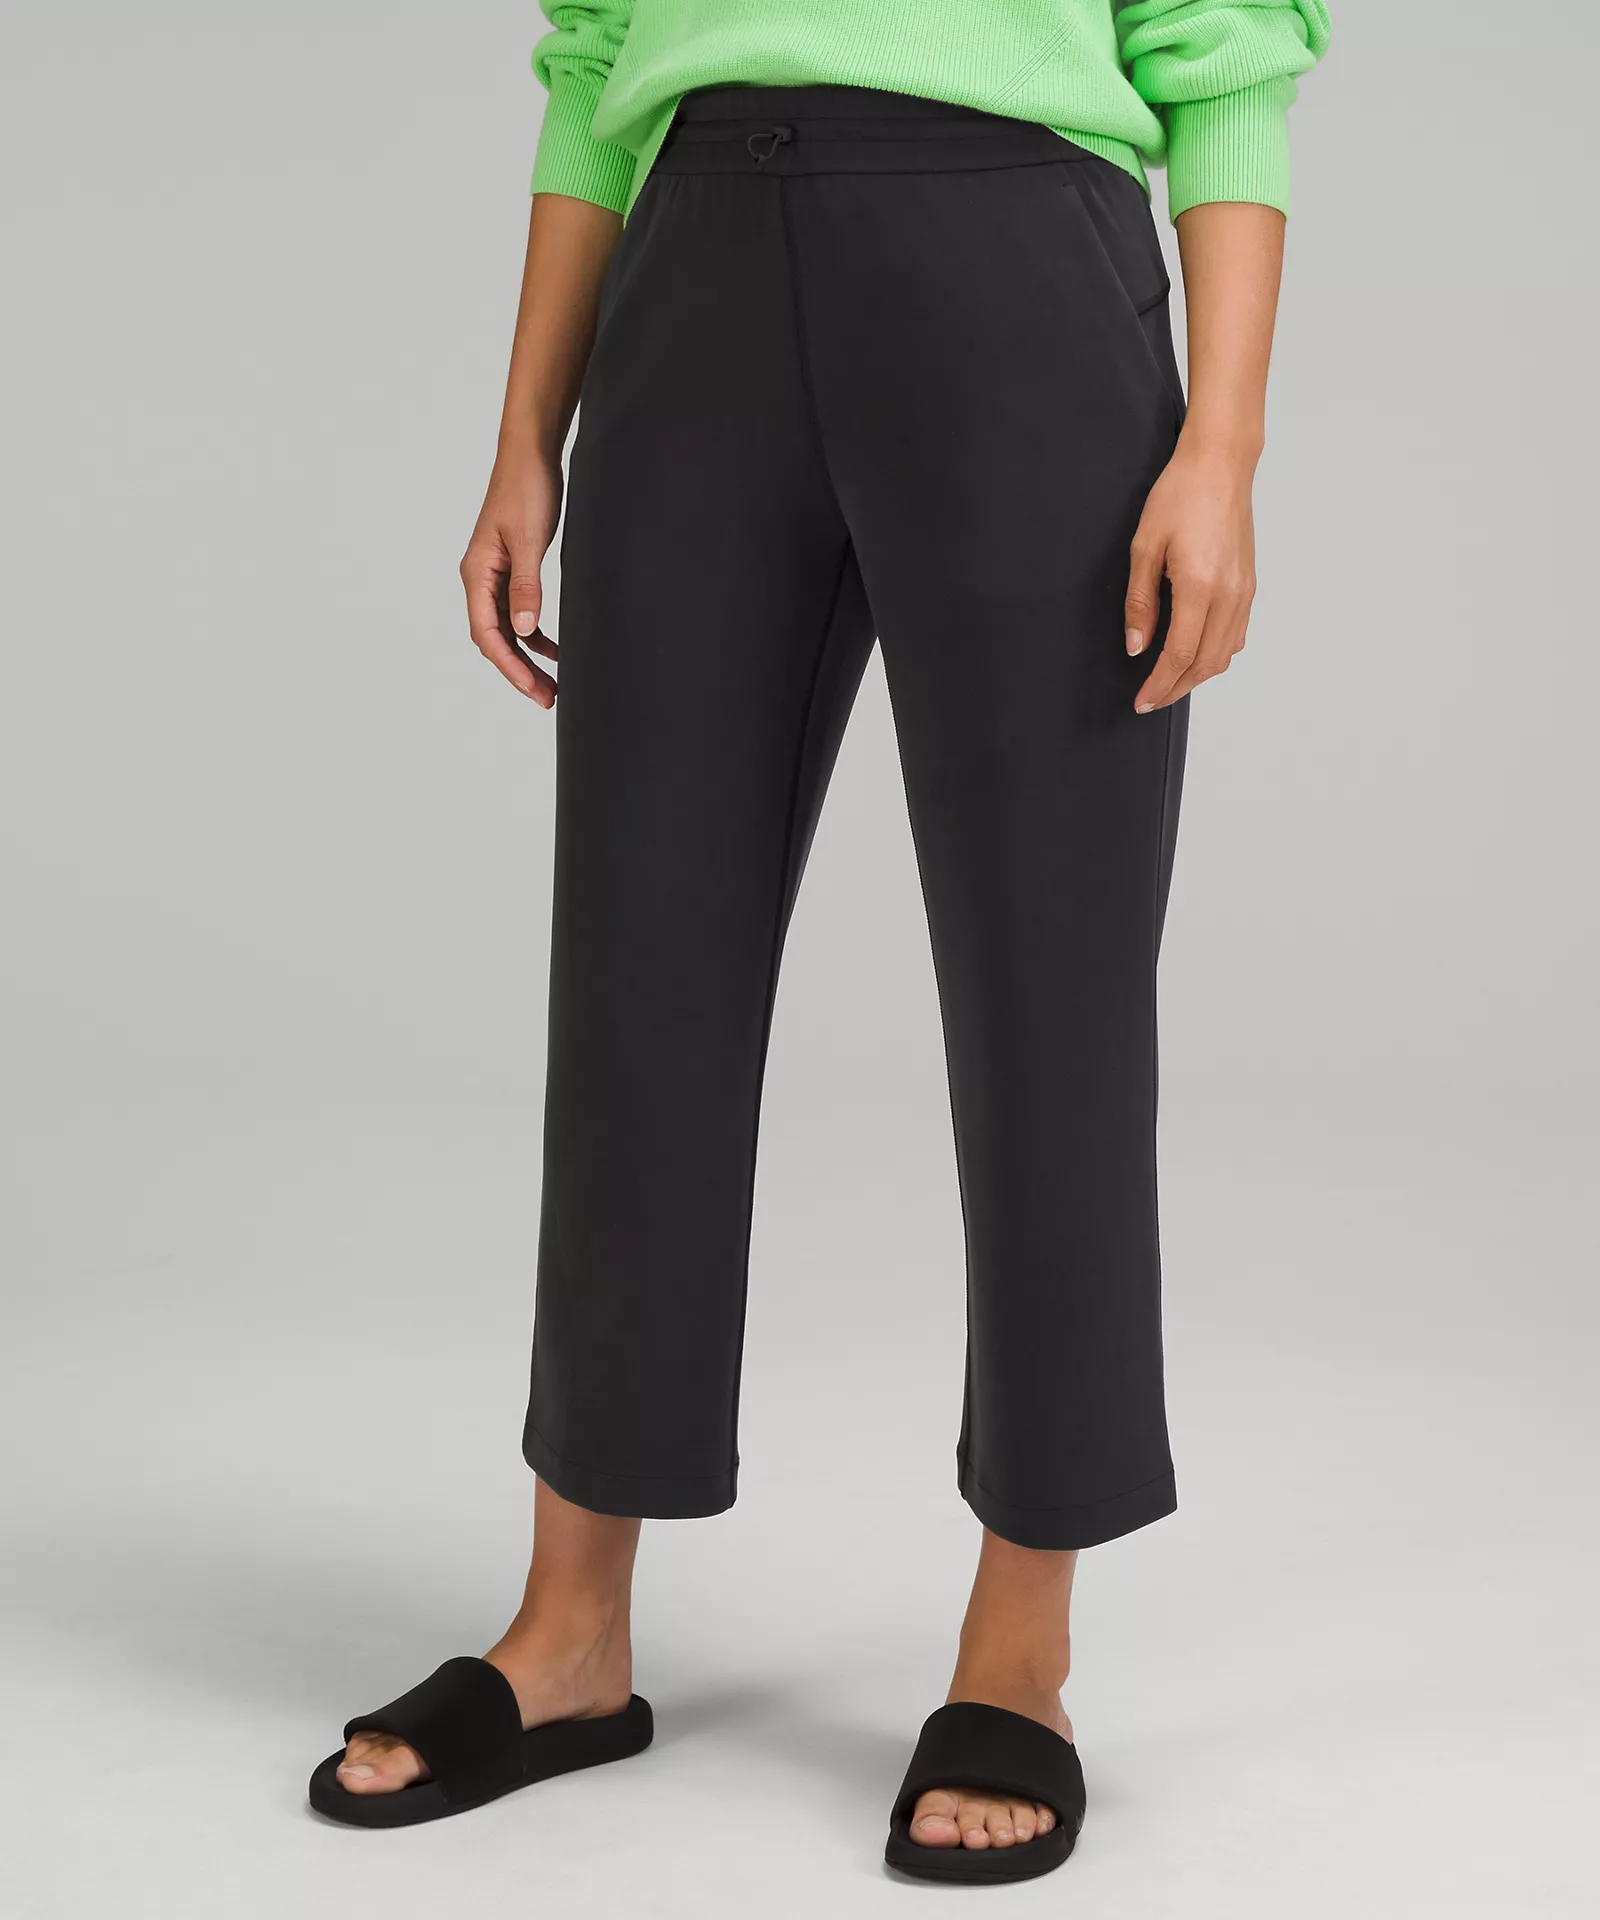 Women's Softstreme Clothes